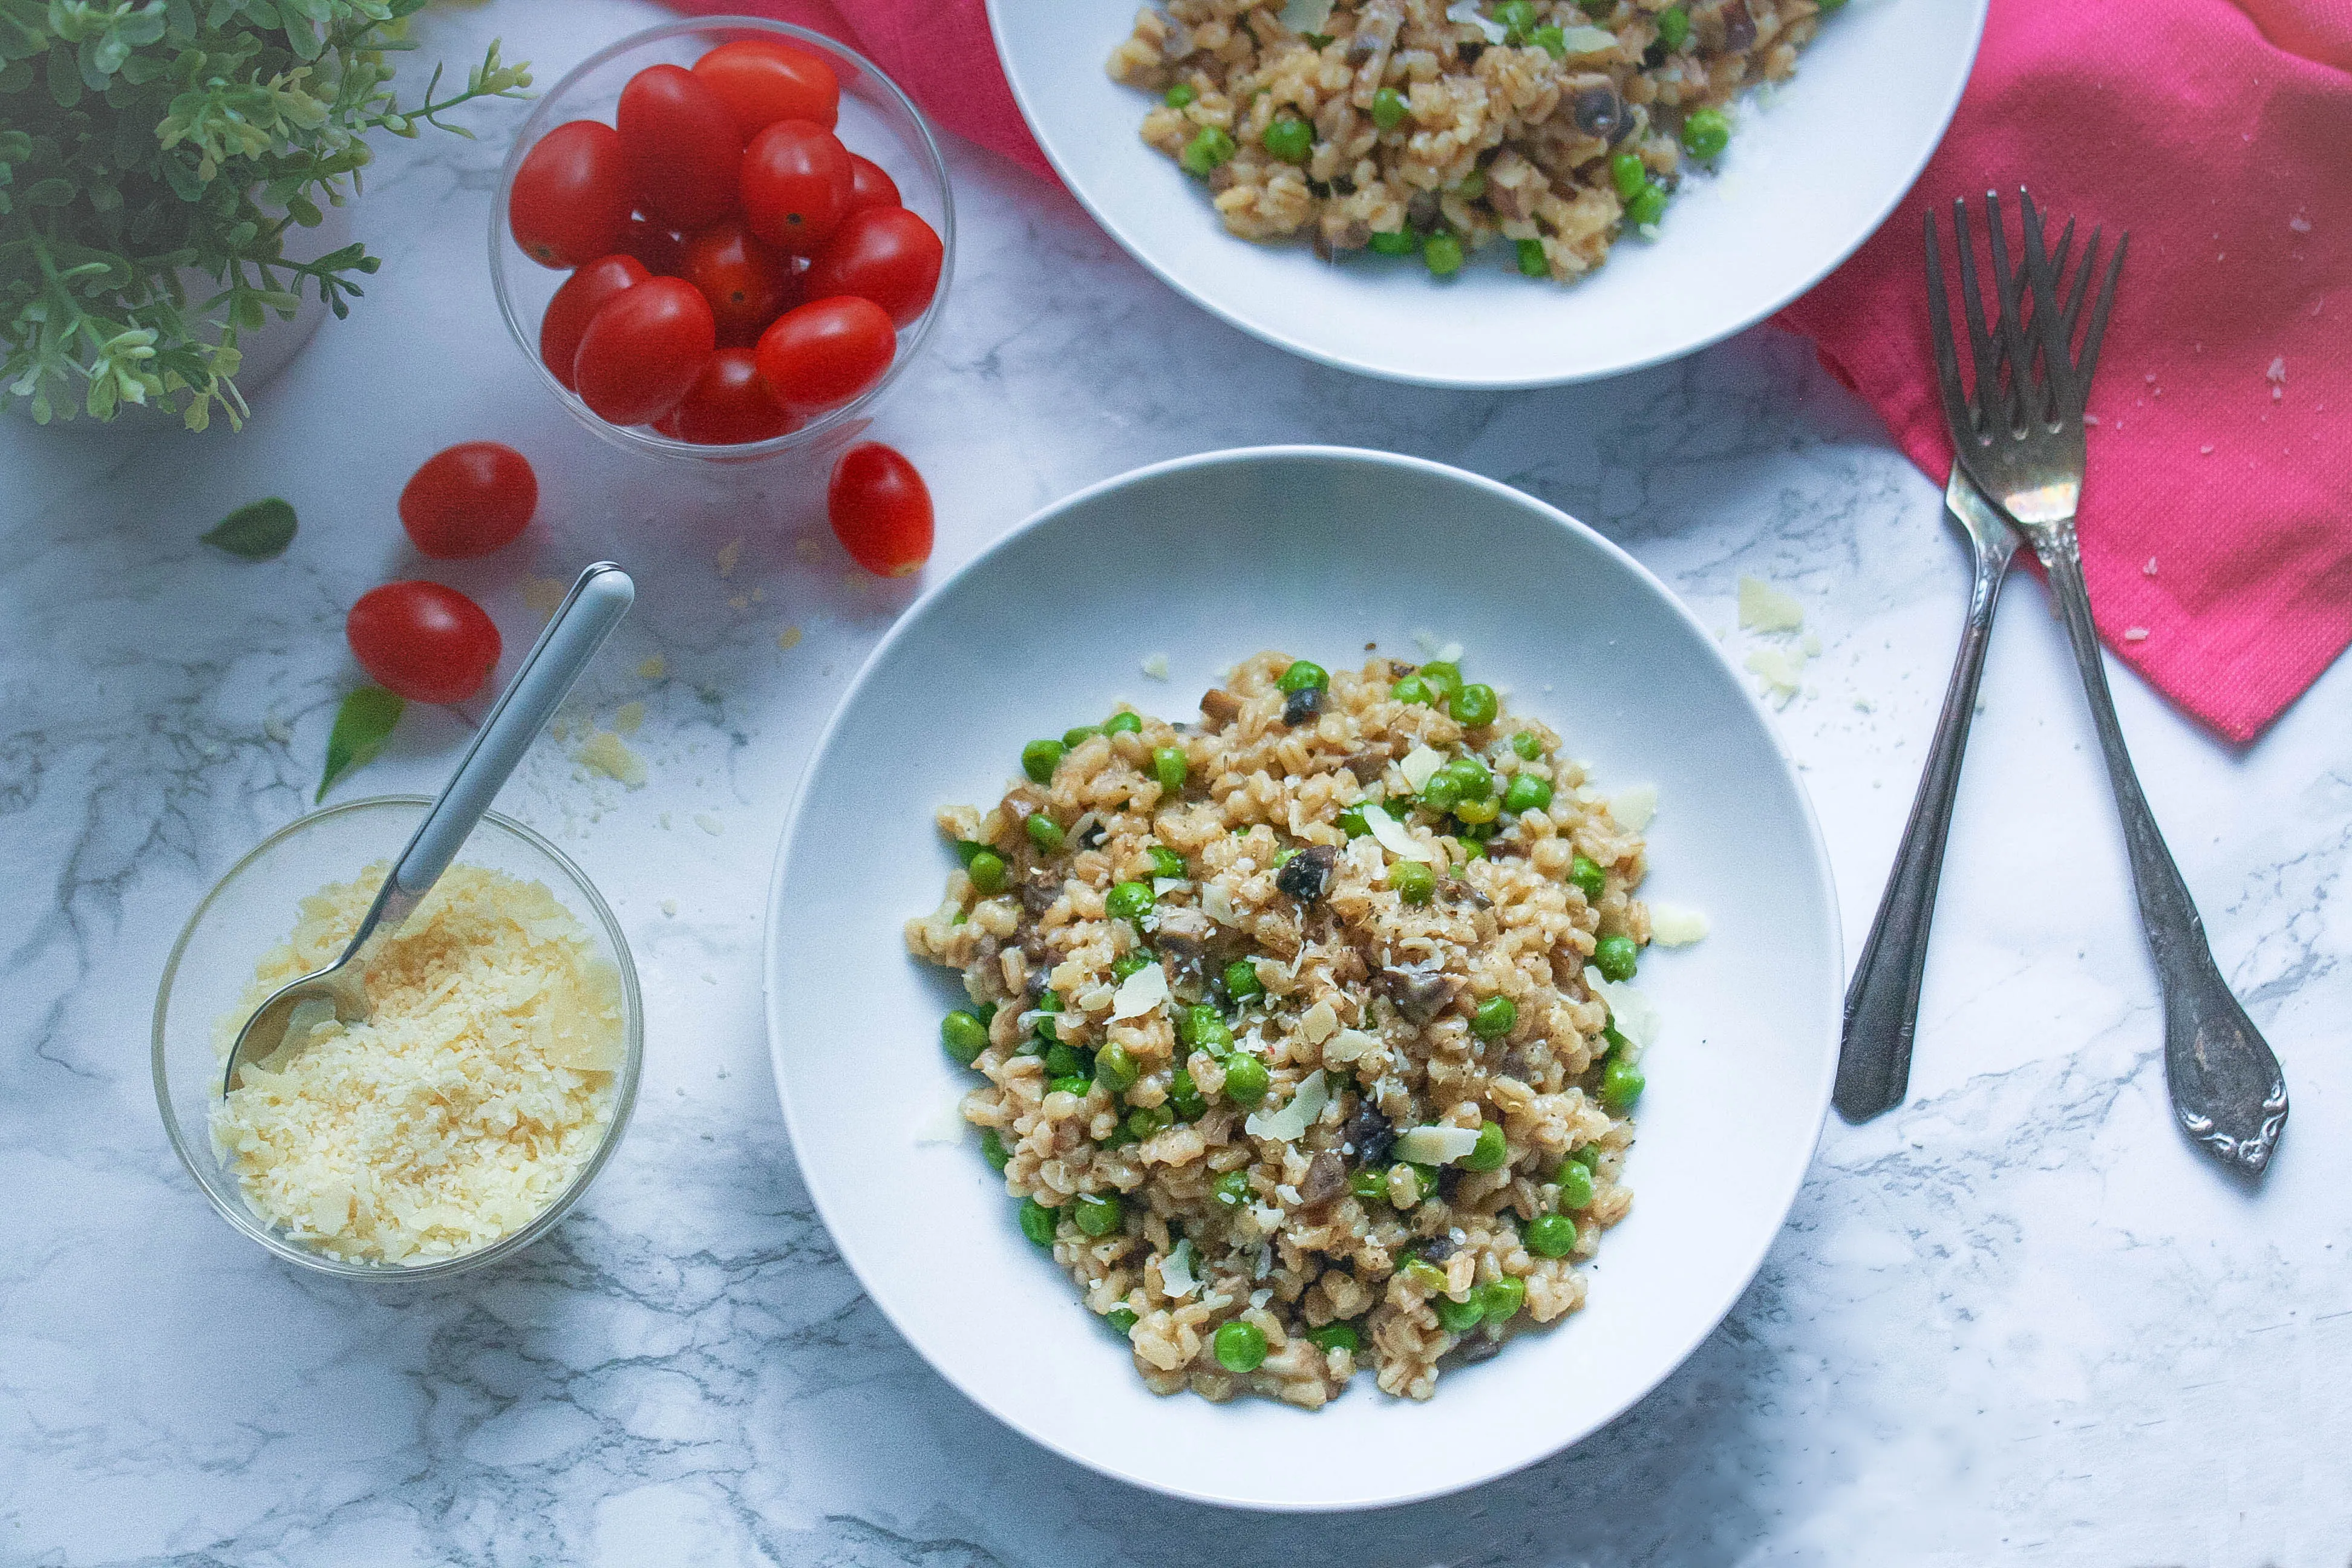 Barley Risotto with Mushrooms and Peas takes things to a new, hearty level! Barley Risotto with Mushrooms and Peas incorporates barley instead of rice for a hearty dish you'll love.